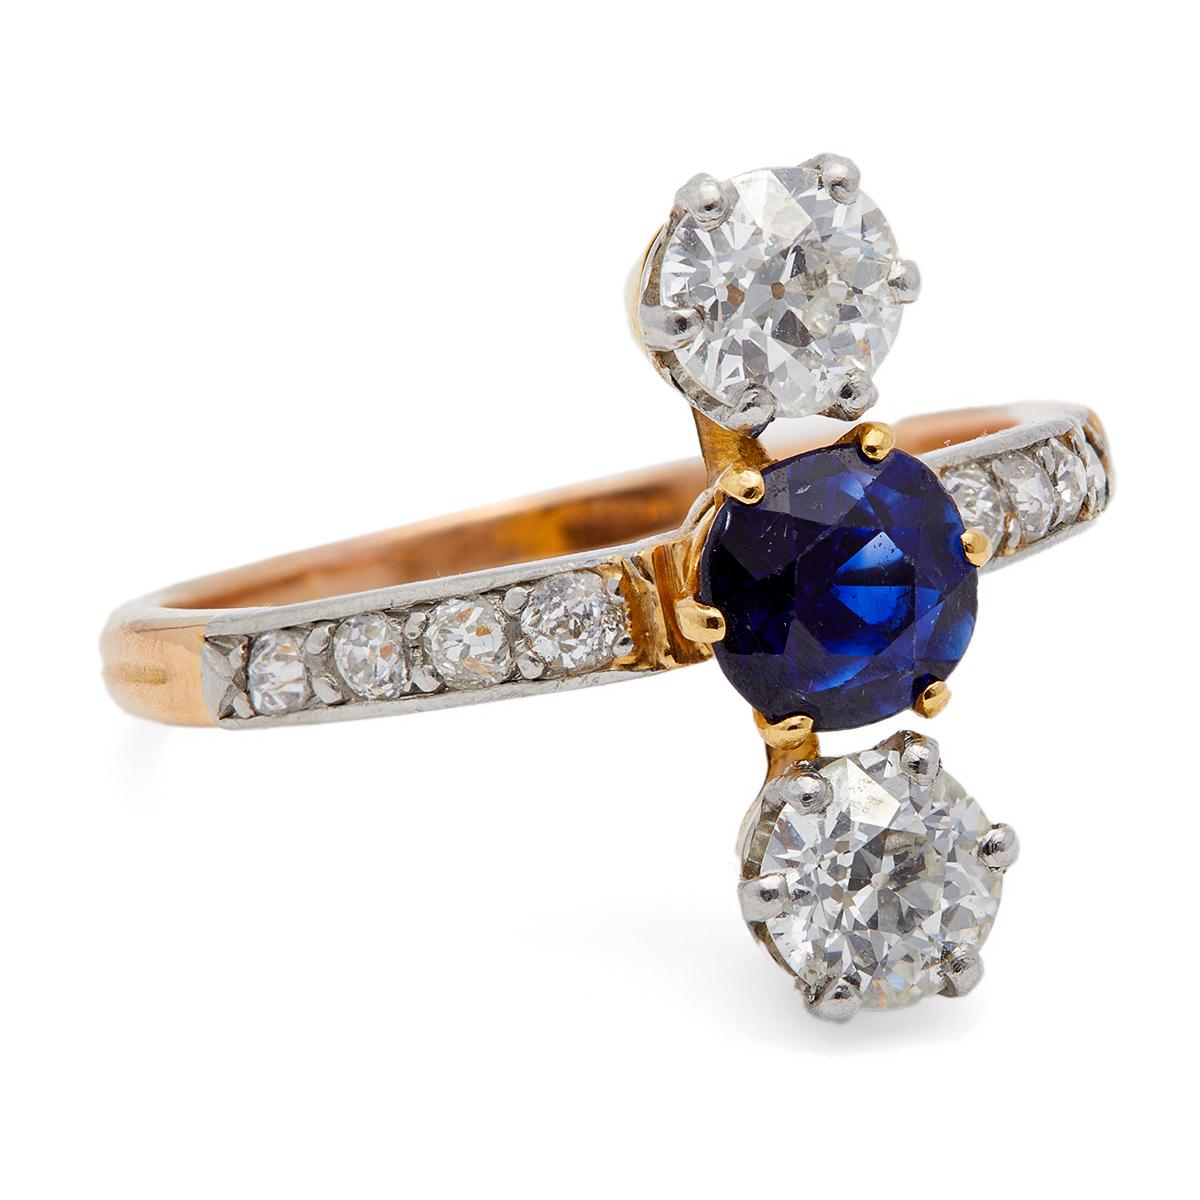 Women's or Men's Belle Époque French Sapphire and Diamond 18k and Platinum Ring